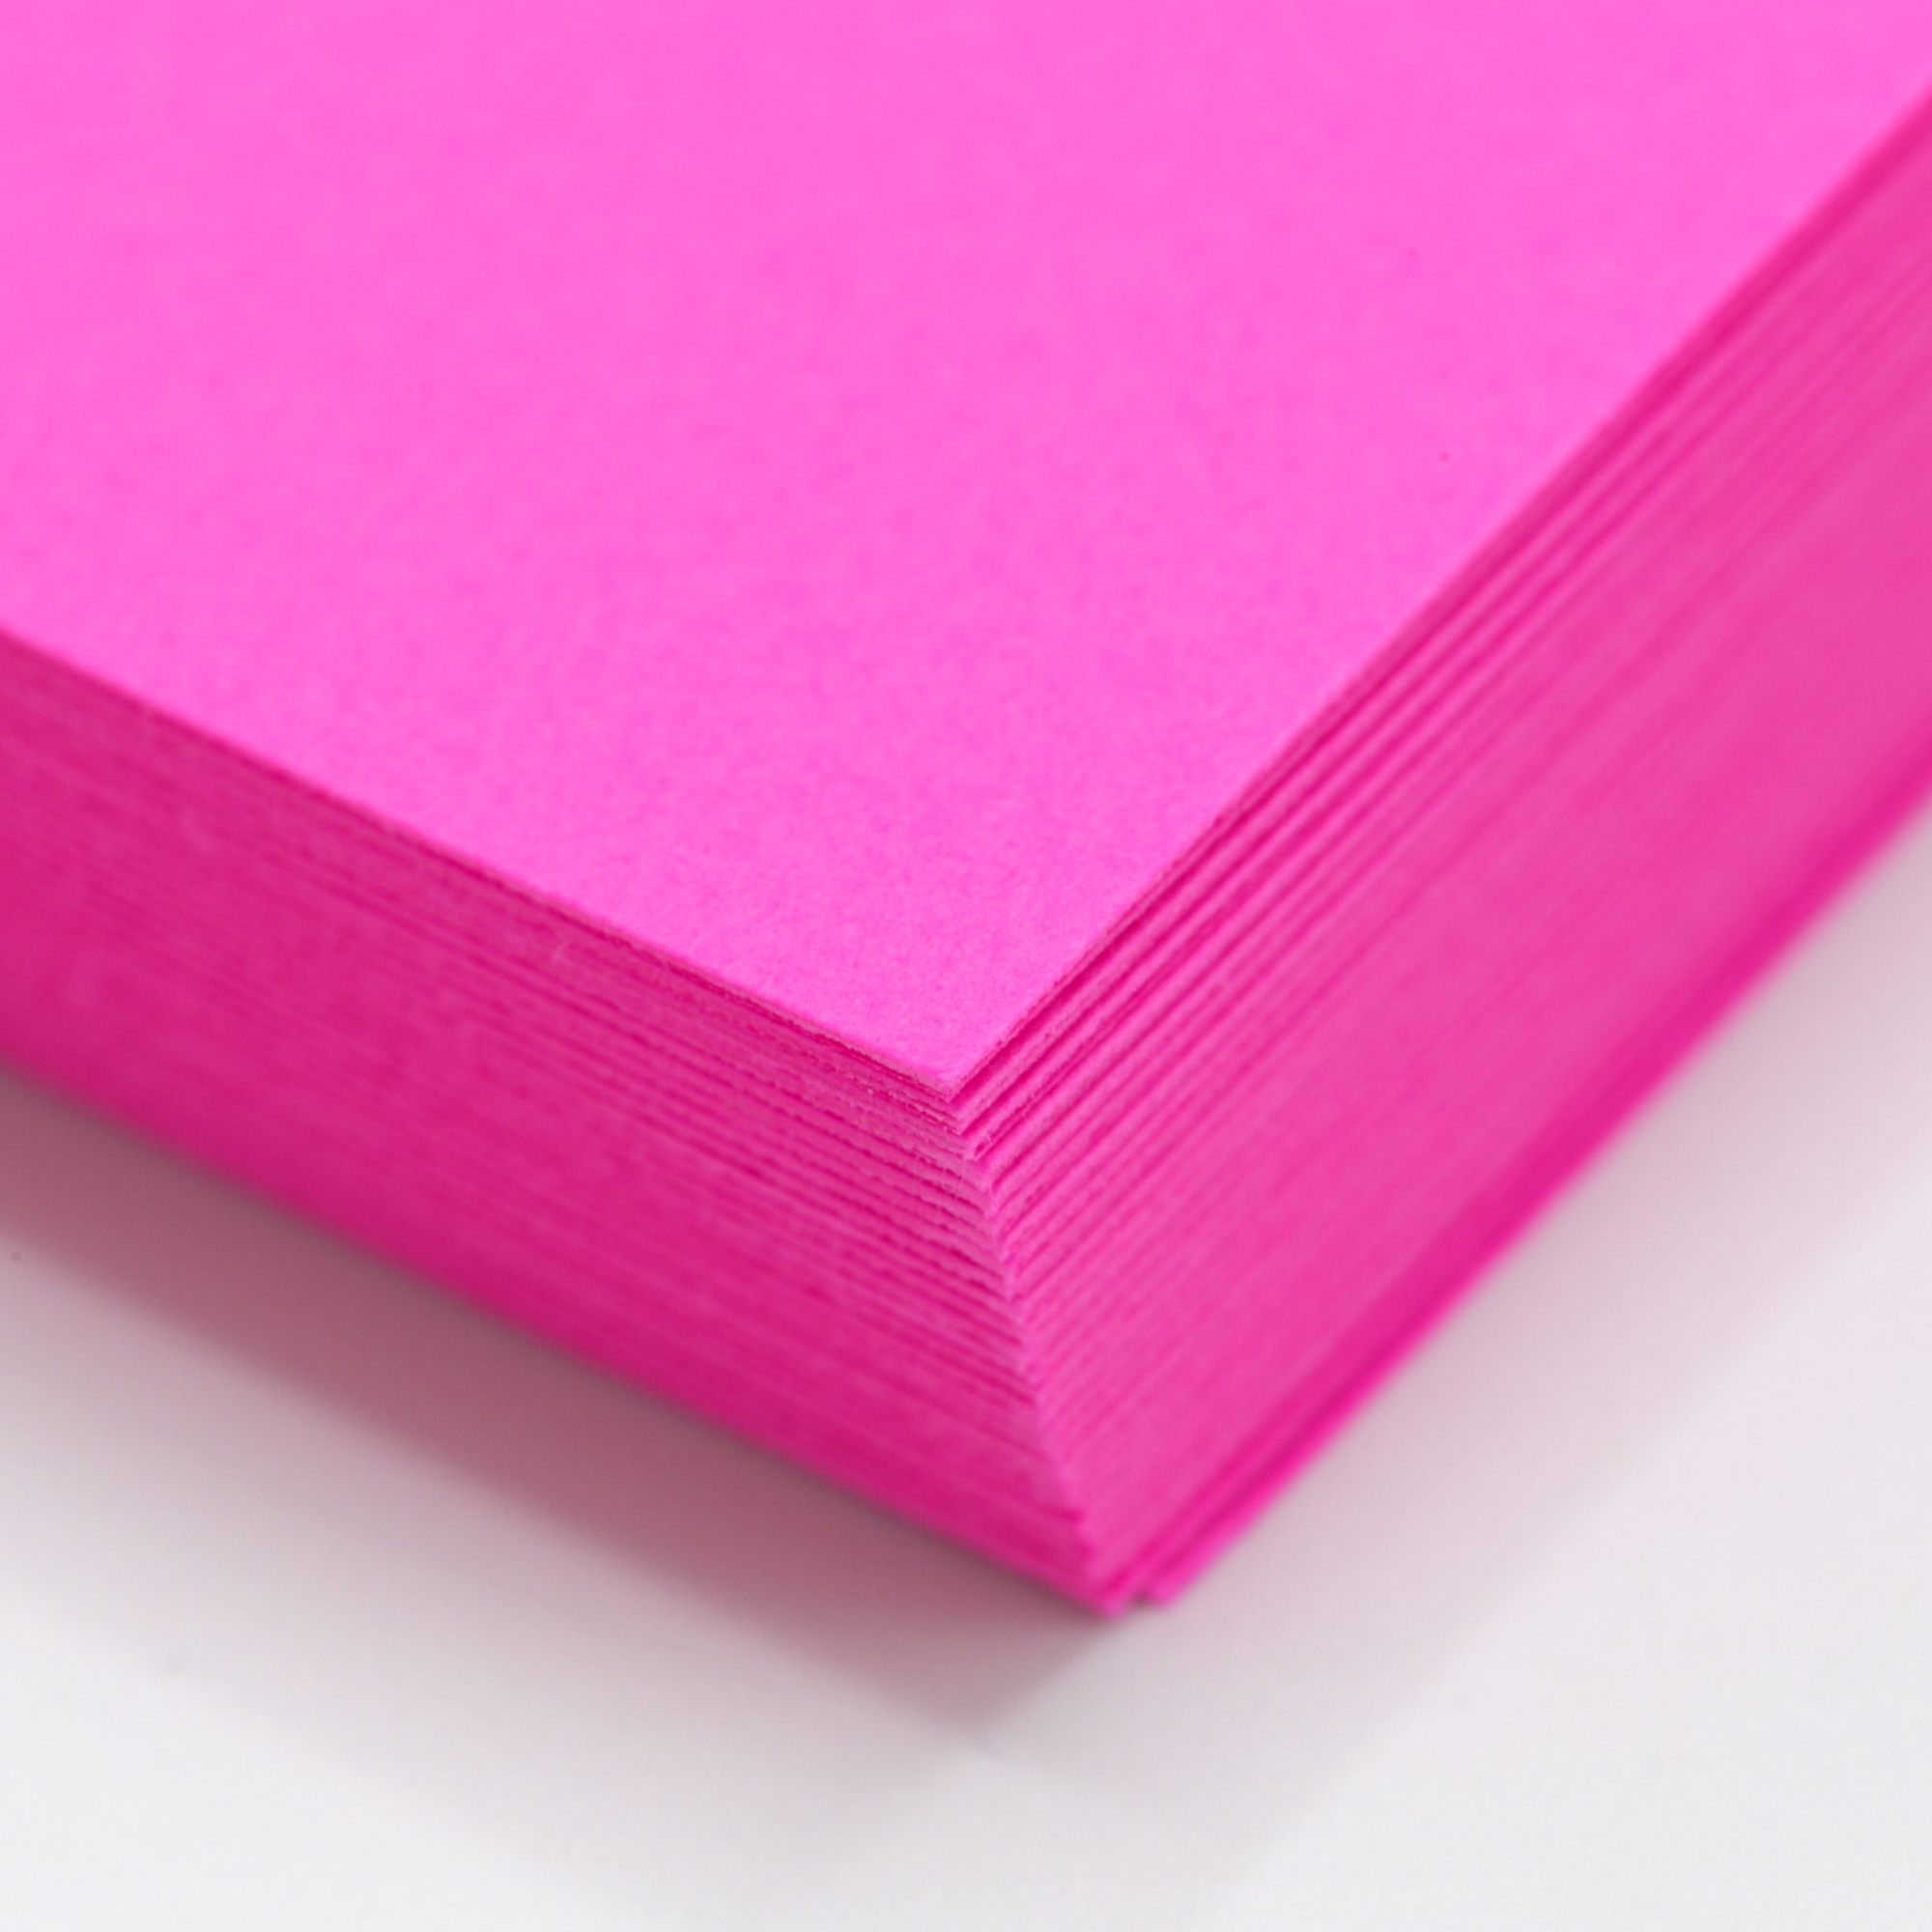 Plasma Pink Paper - 8 1/2 x 11 in 60 lb Text Smooth